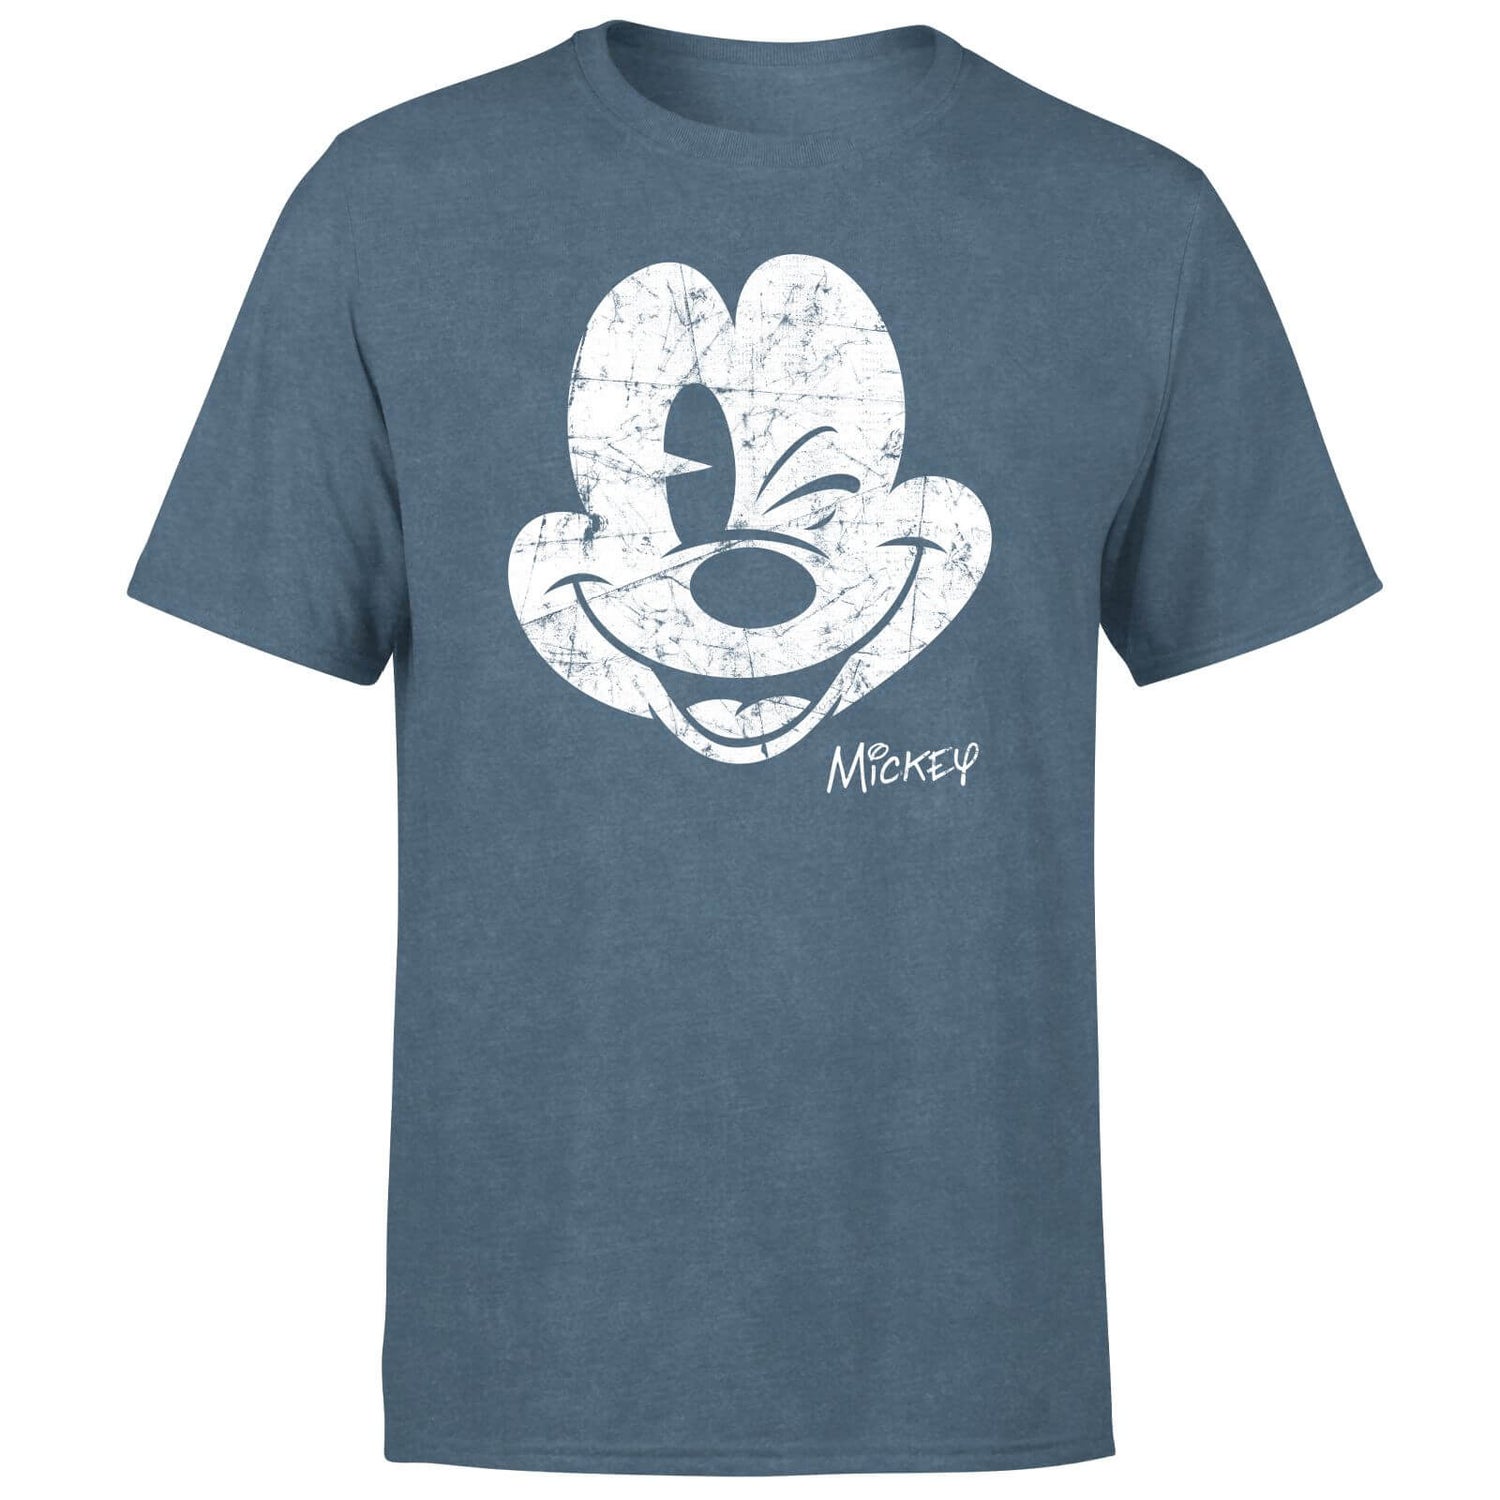 Mickey Mouse Worn Face Men's T-Shirt - Navy Acid Wash